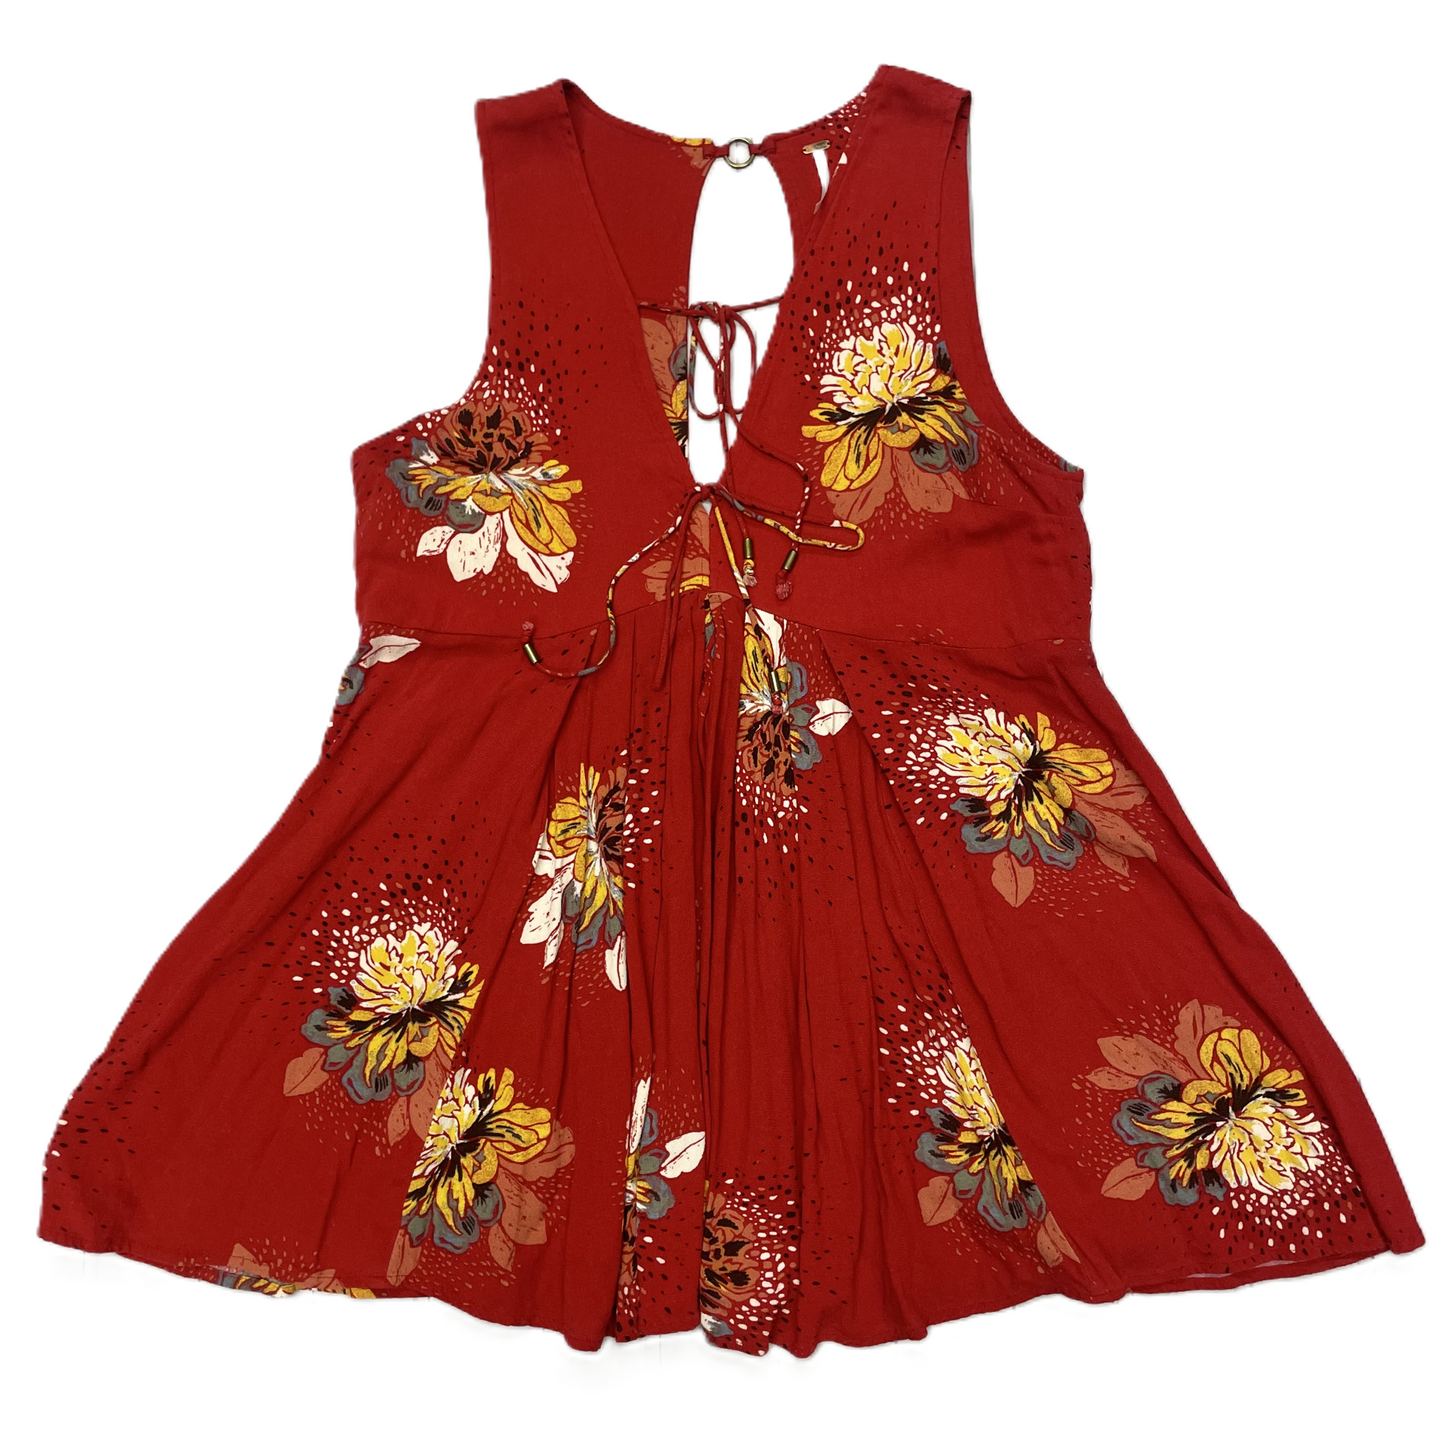 Red & Yellow Tunic Sleeveless By Free People, Size: S